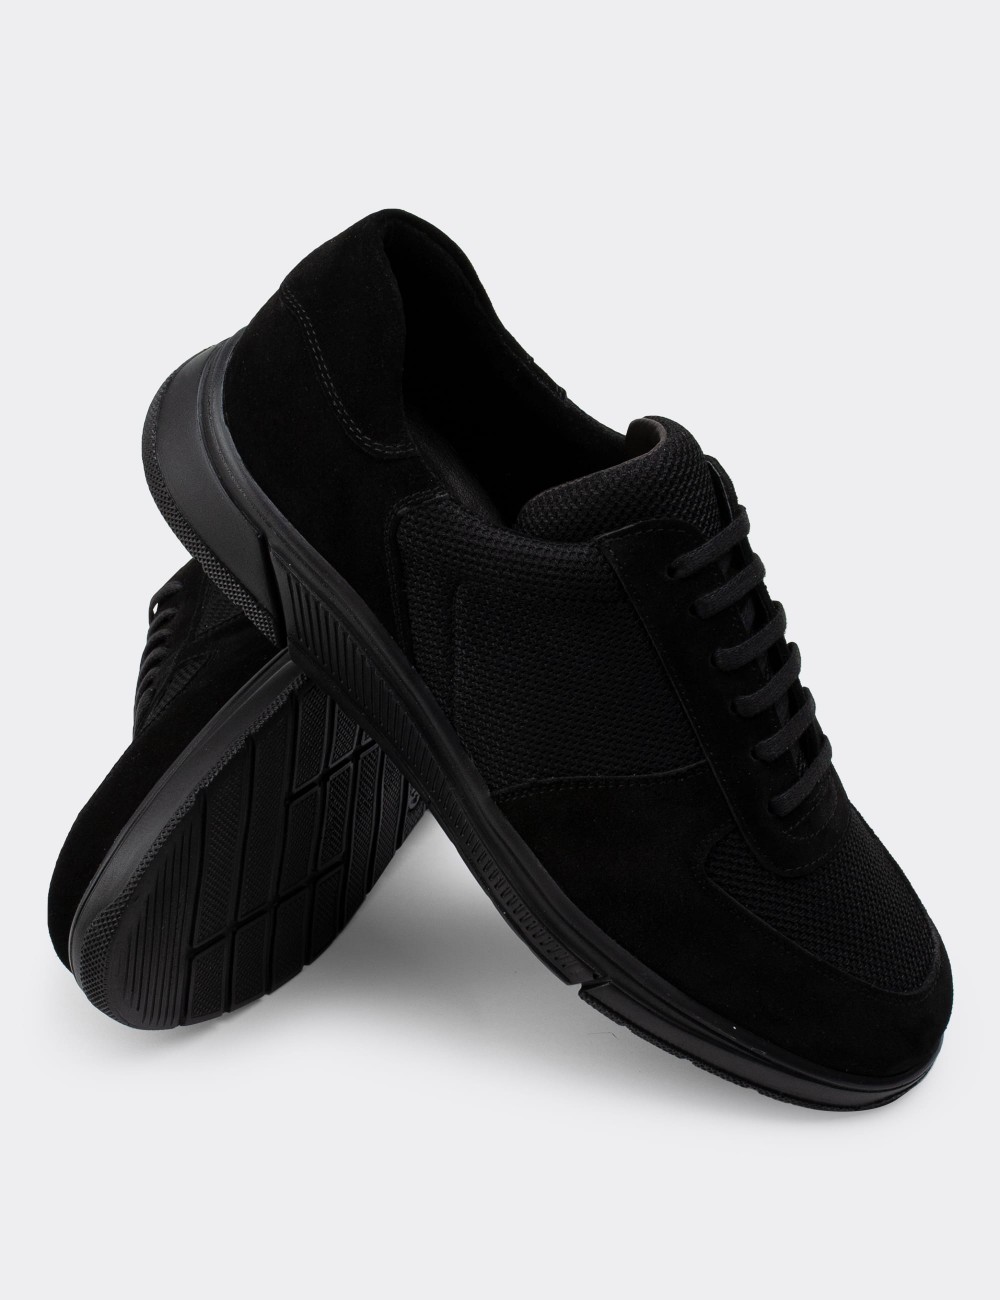 Black Suede Leather Sneakers - 01860MSYHC01